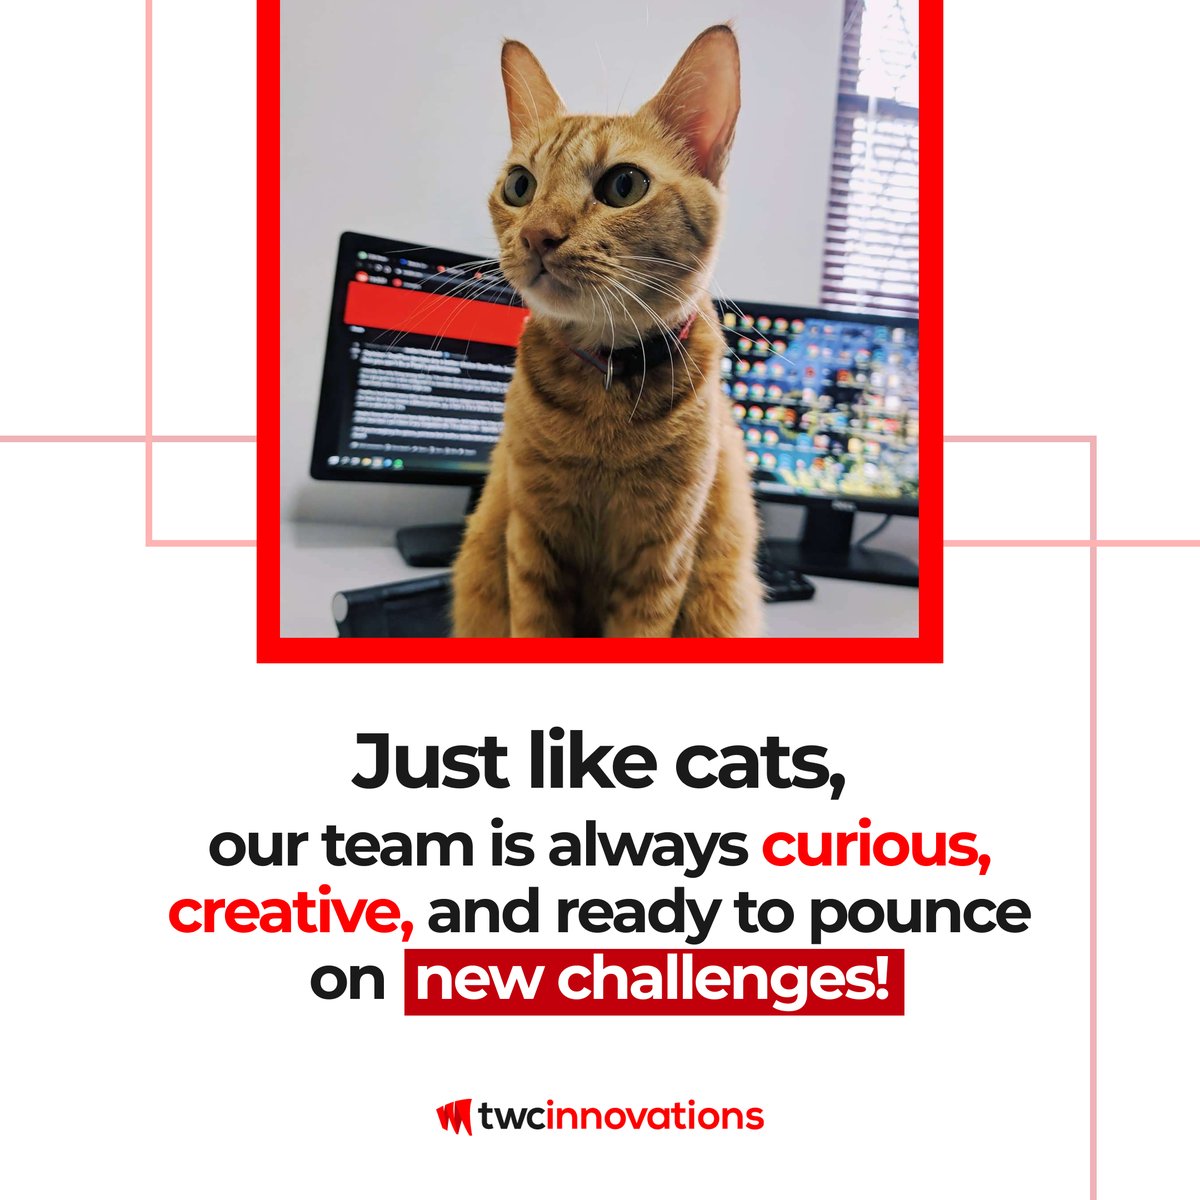 TWC Innovation is all about making every project a purr-fect success! Join us and let's embark on exciting projects together!

#TWCInnovation #TechWhiskers #InnovateWithUs #PawsitiveVibesOnly #CreativeTech #PurrsuingInnovation #CatsAndCode